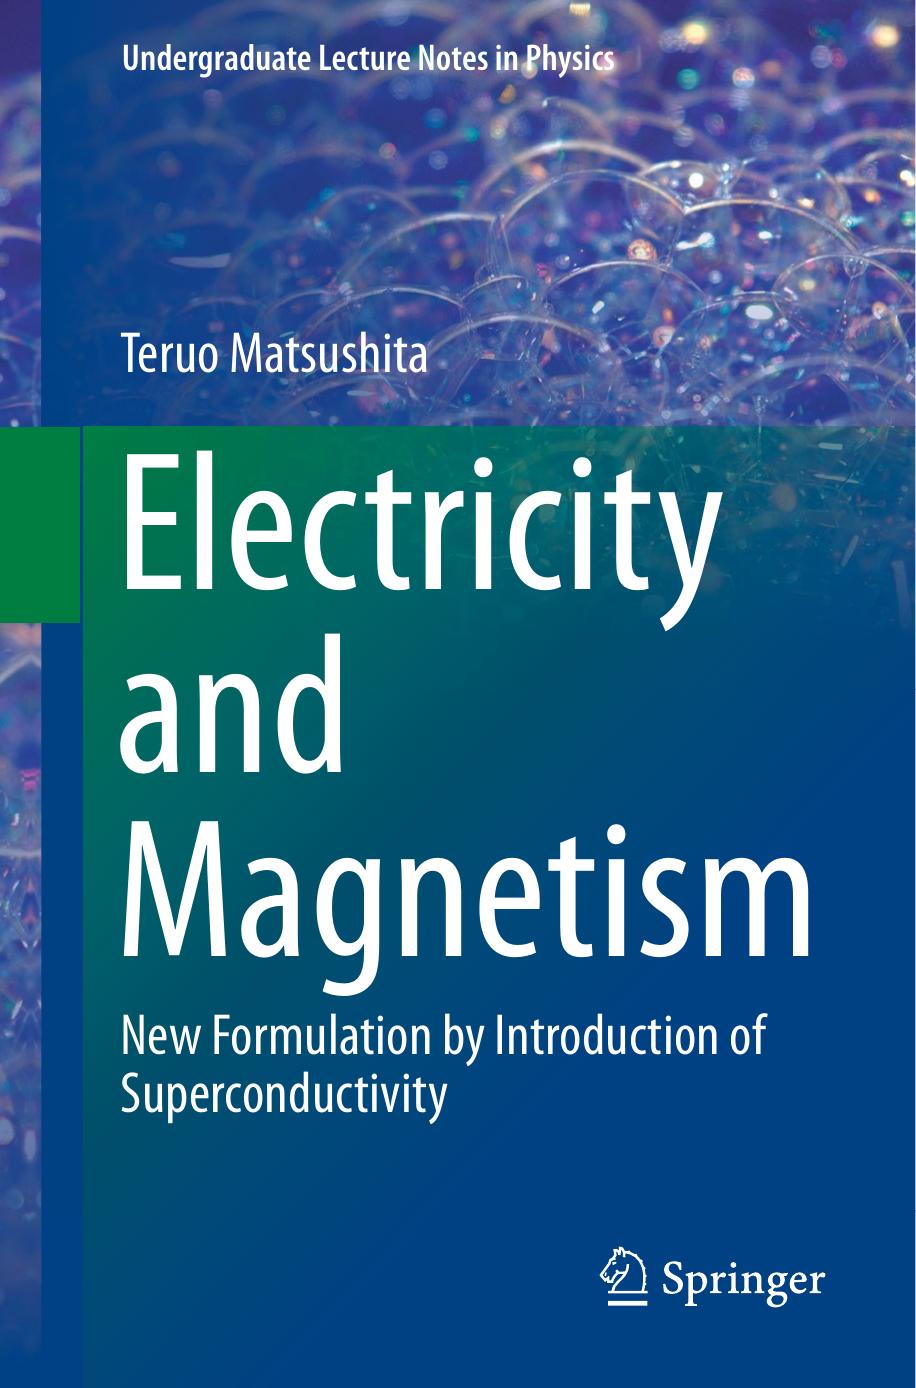 Electricity and Magnetism by Teruo Matsushita